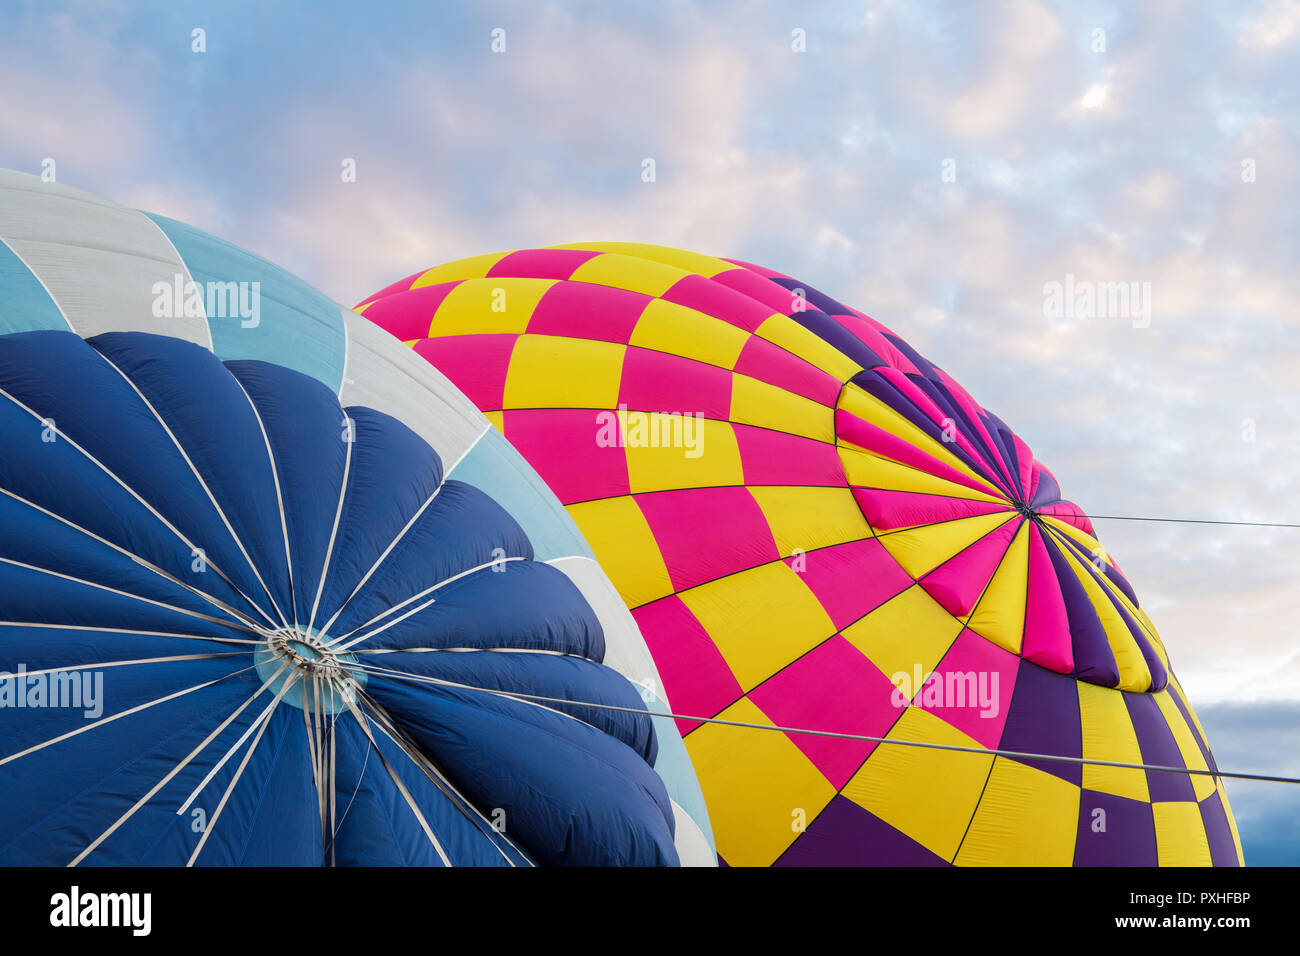 Colorful hot air balloons in vibrant colors of blue, purple, pink, and yellow  being inflated under an beautiful early morning sky at sunrise Stock Photo